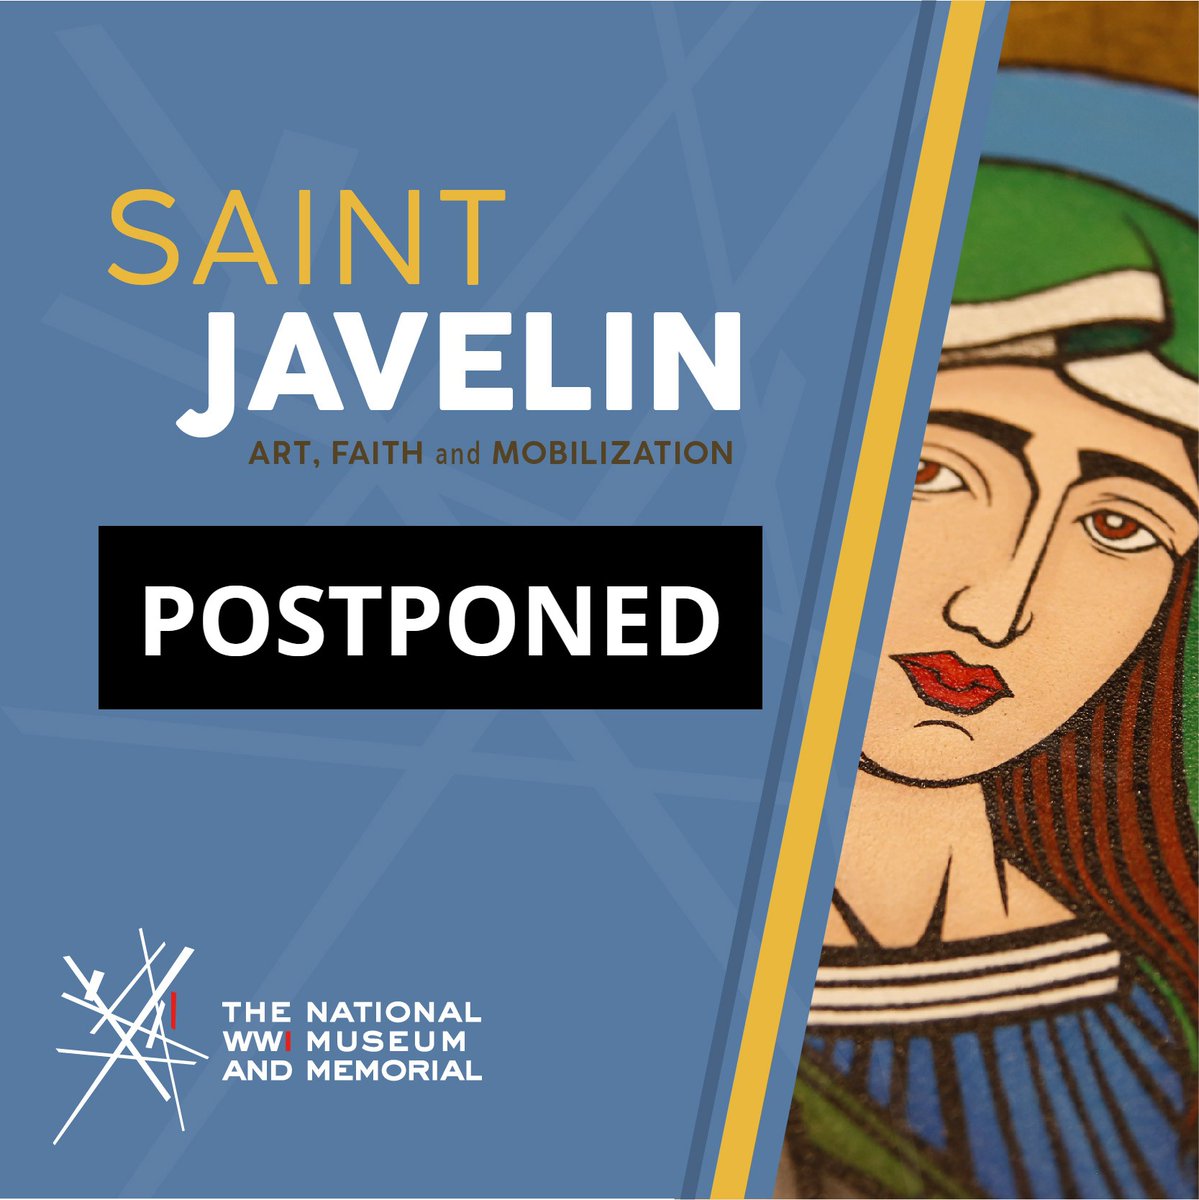 Due to a family medical event, the Museum and Memorial is postponing the Saint Javelin: Art, Faith and Mobilization conversation planned for Feb. 24 until later this year. The reception benefiting Stand with Ukraine KC will continue as planned at 5 p.m.: bit.ly/3ZOjvP1